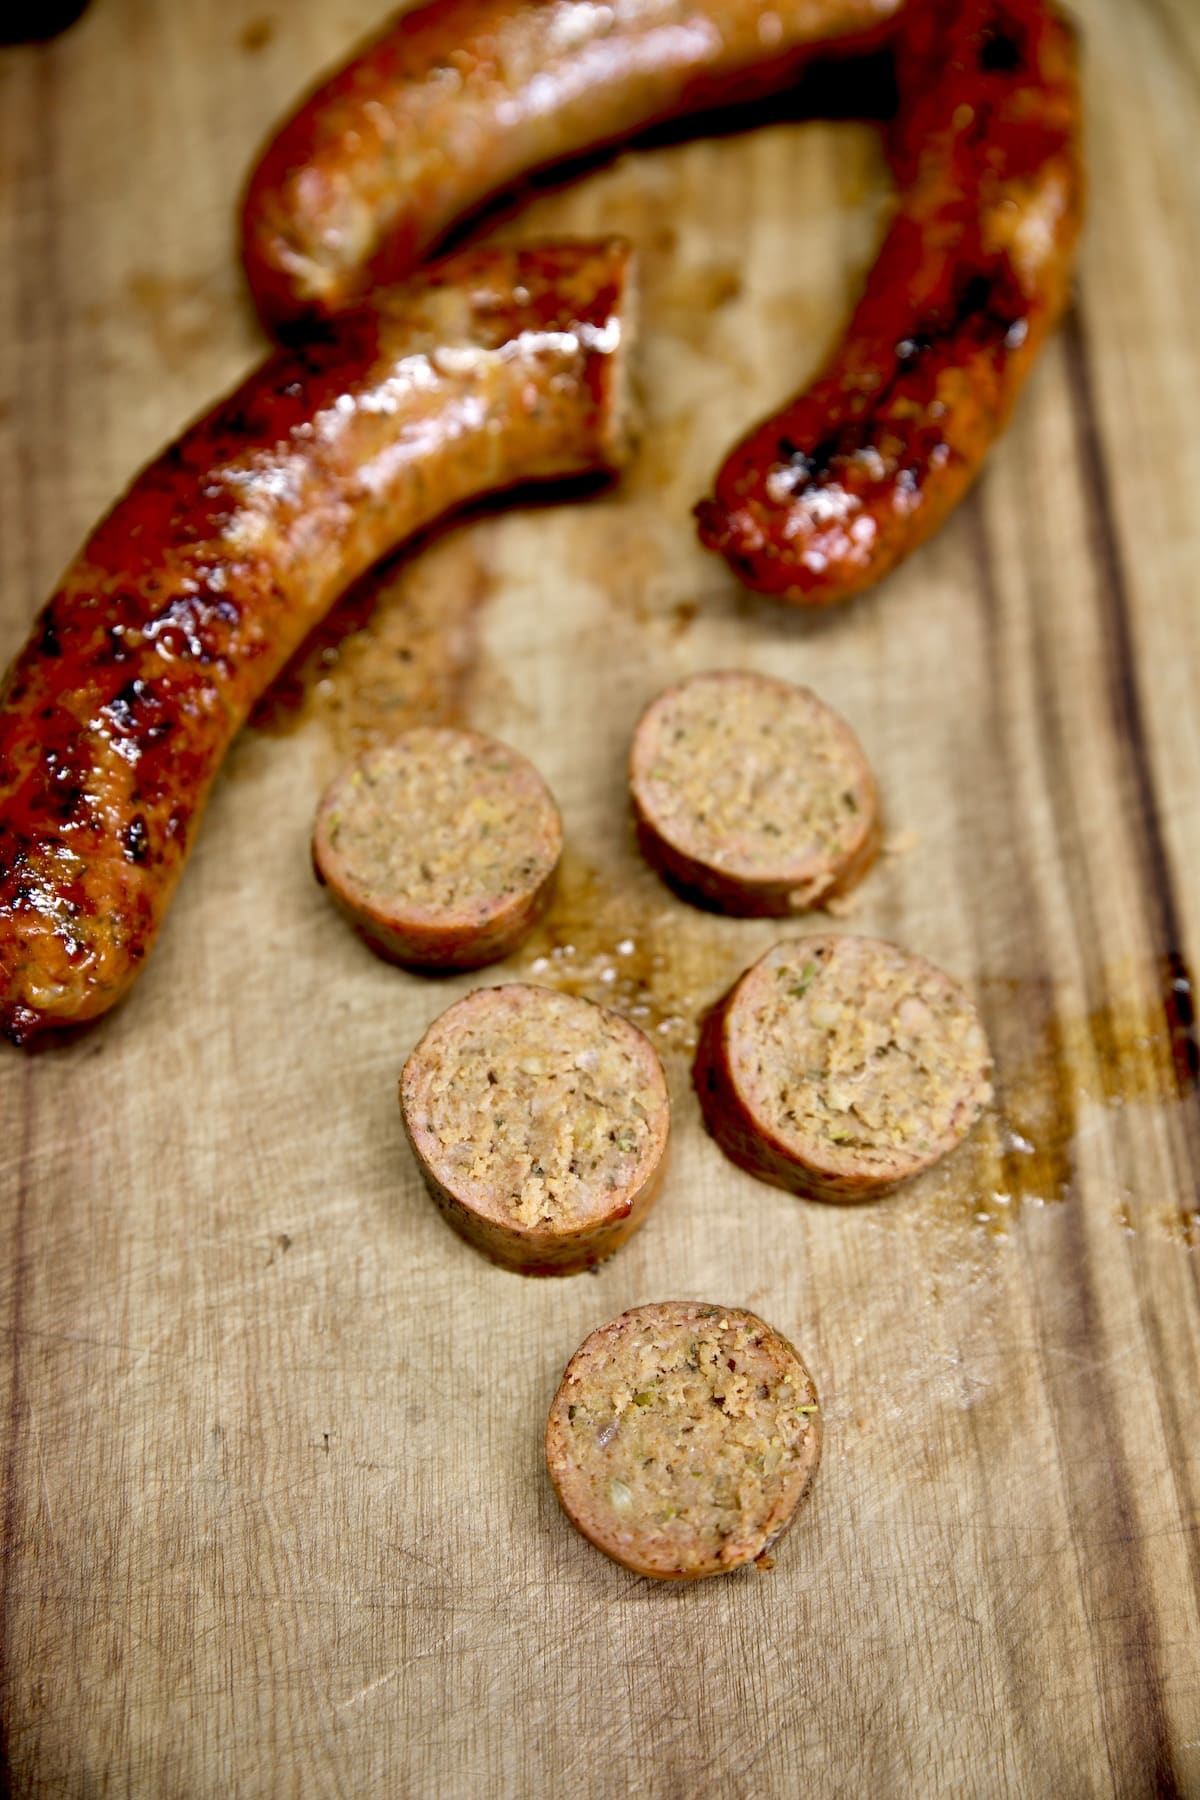 Smoked Italian Sausage links, one sliced on a cutting board.